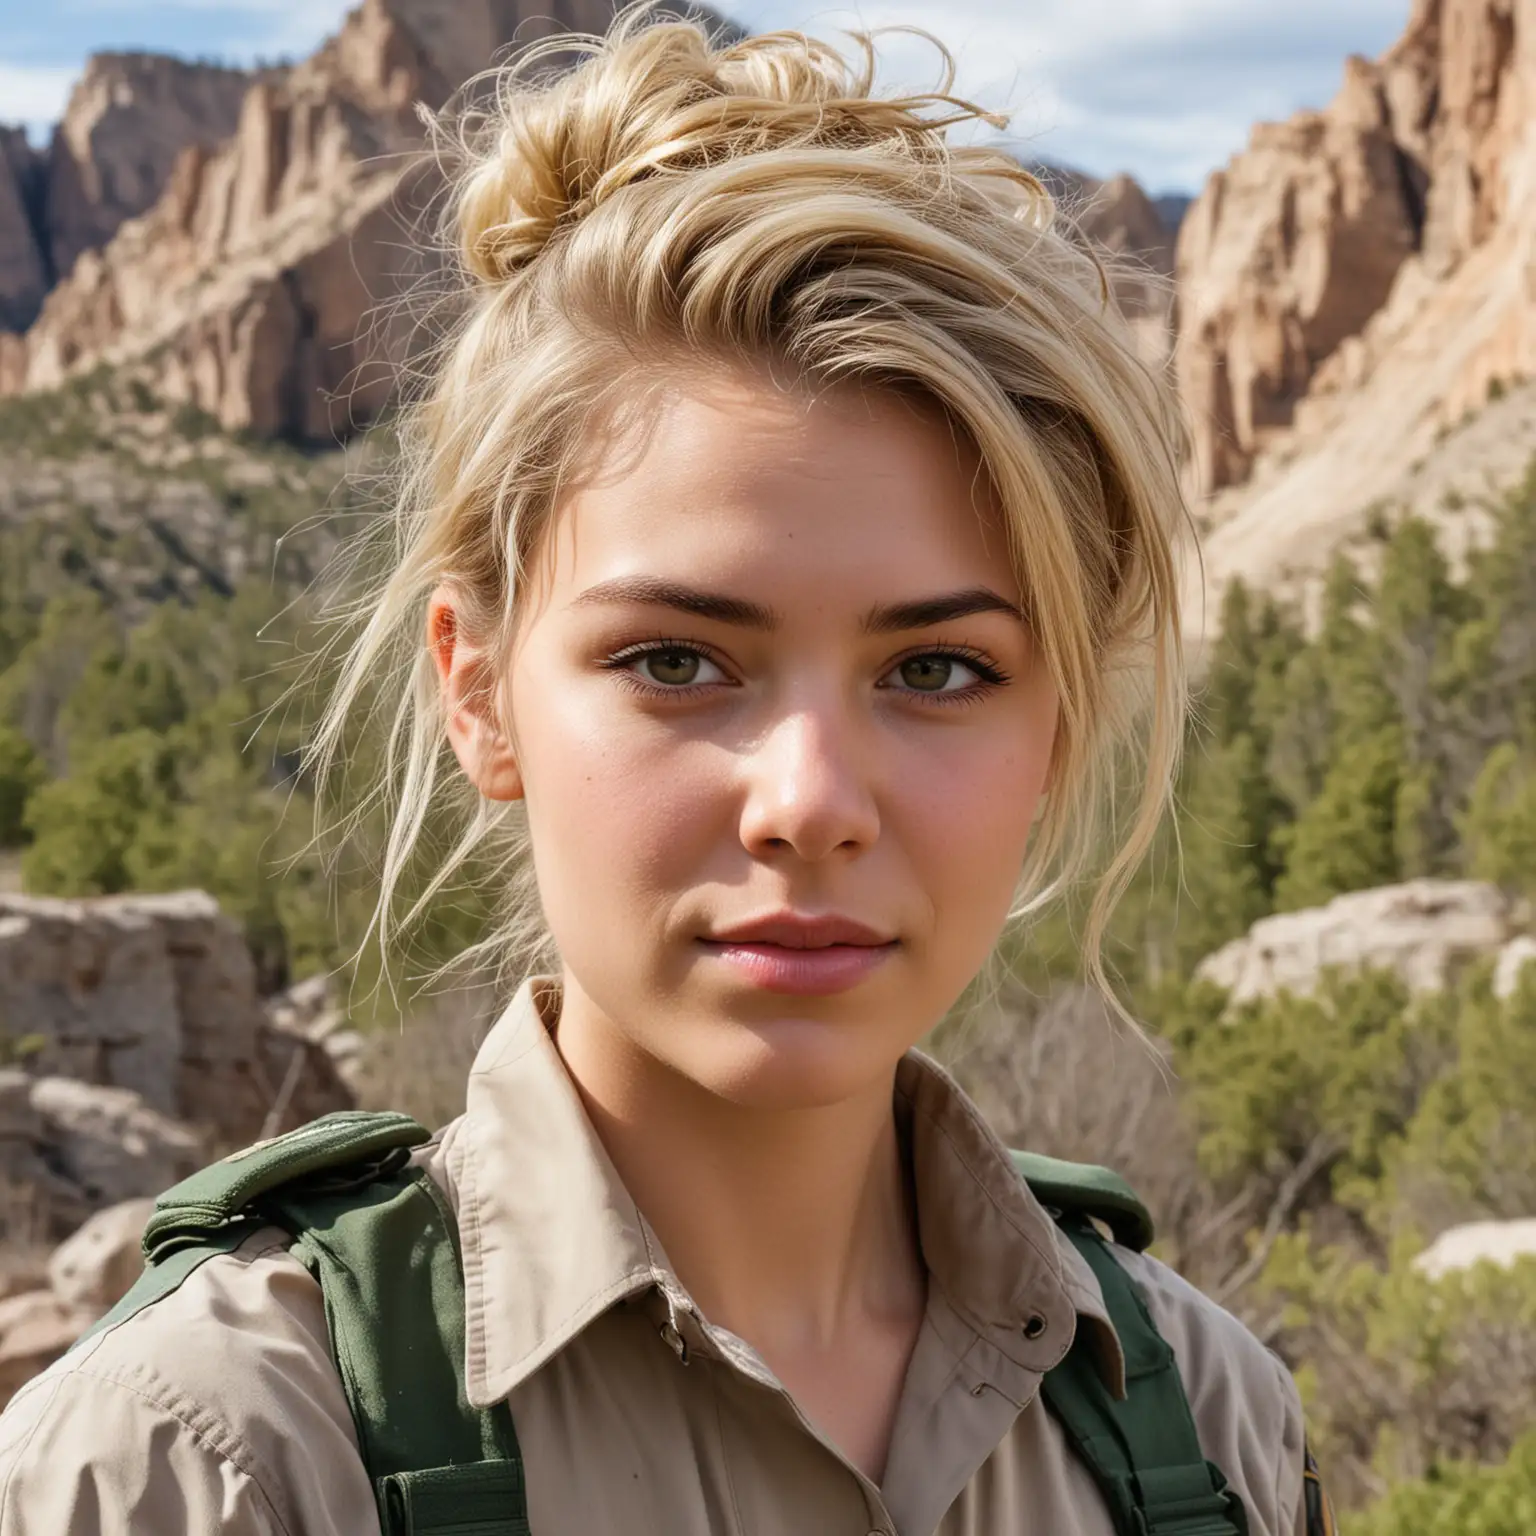 Young Female Park Ranger with Blonde Messy Updo in American National Park